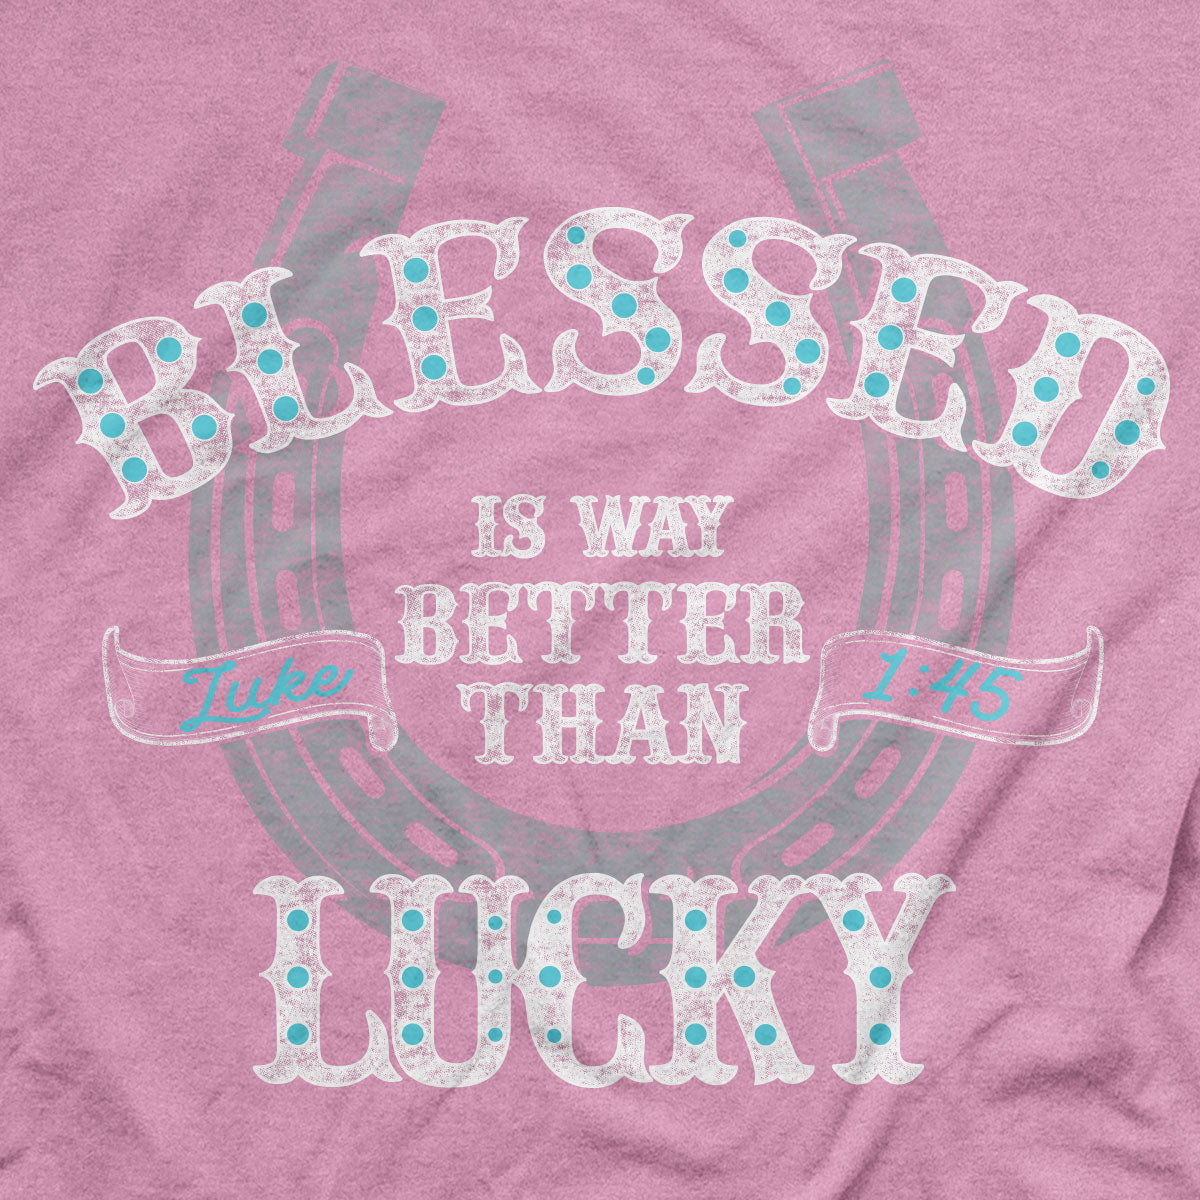 grace & truth Womens T-Shirt Blessed Is Better Than Lucky